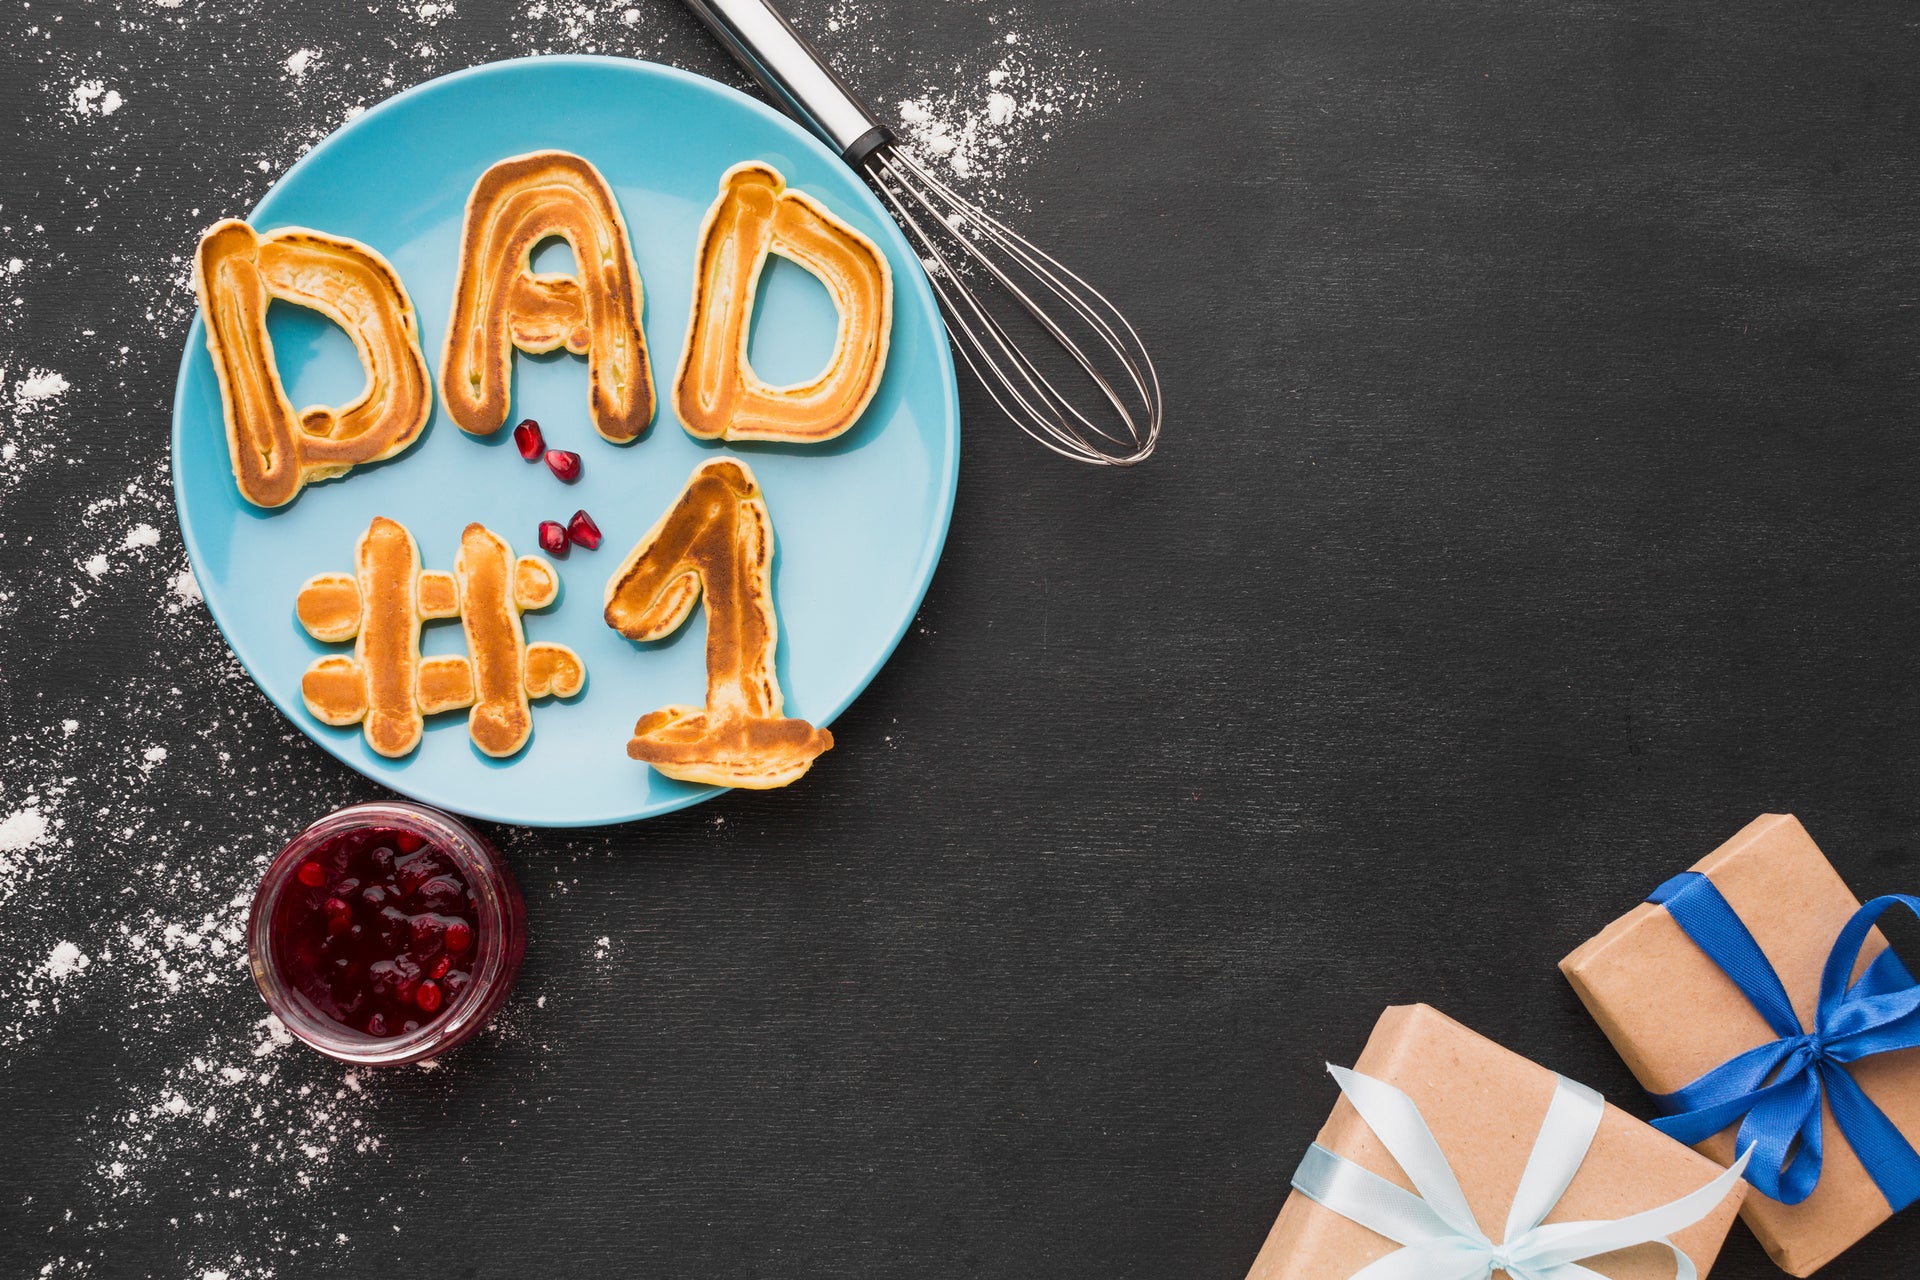 A Sweet Start to Father's Day: Treat Dad to Decadent Breakfast Delights